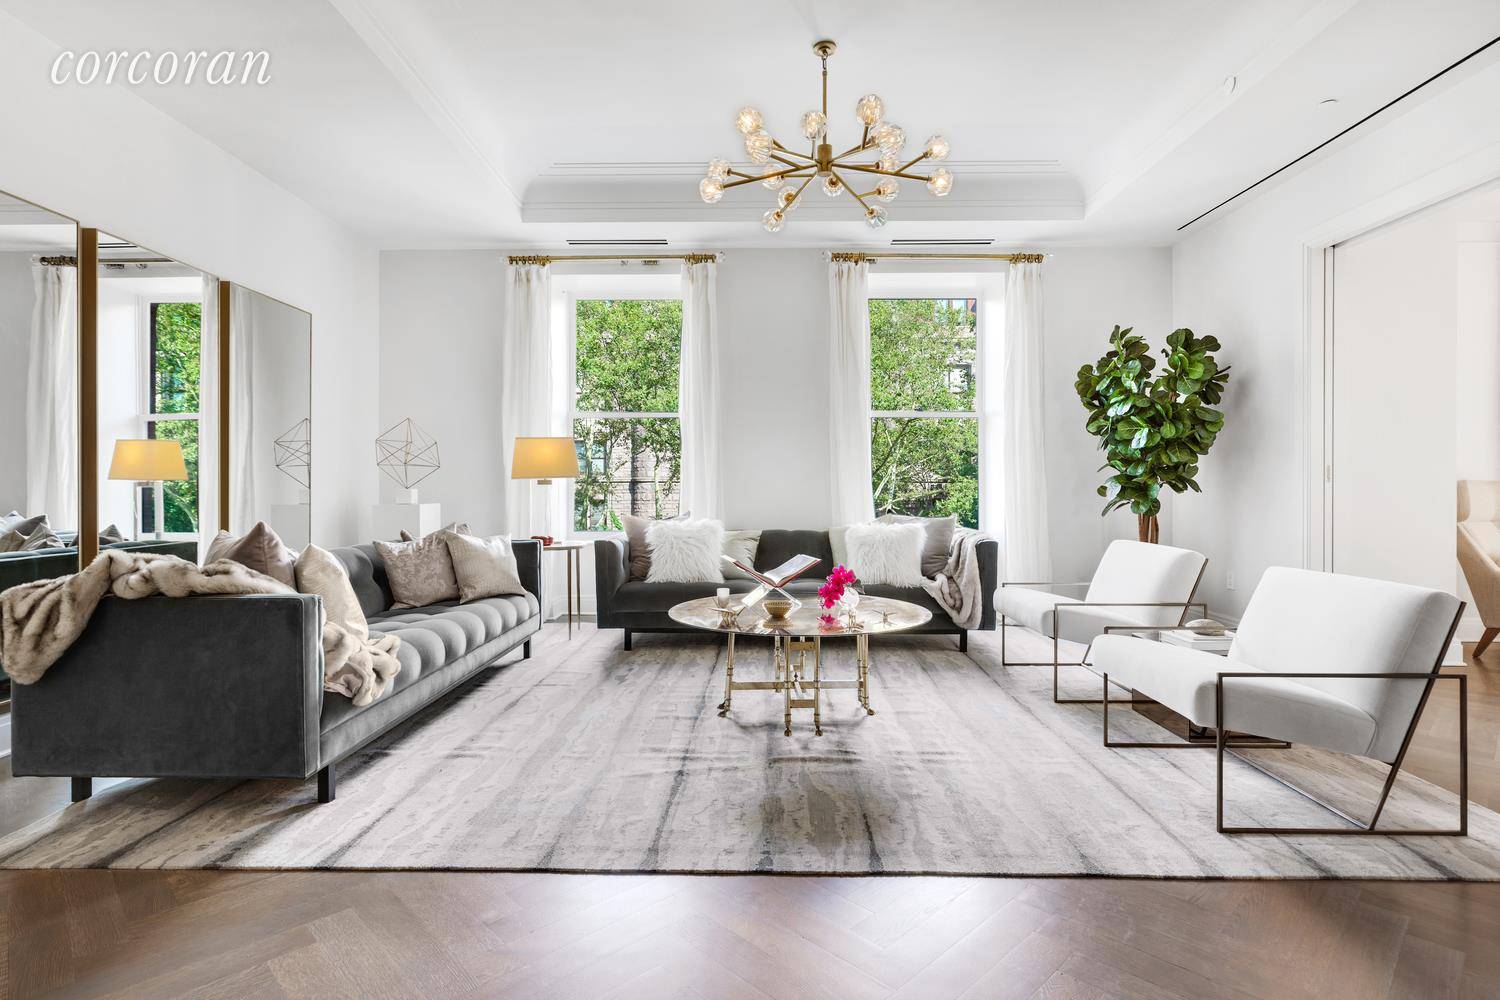 PRESENTING THE FINAL RESIDENCE AT 101 WEST 78TH STREET, NEWLY MODELEDMagnificent Park View brand new 3 to 4 bedroom floor through home features oversized windows overlooking Roosevelt Park surrounding the ...